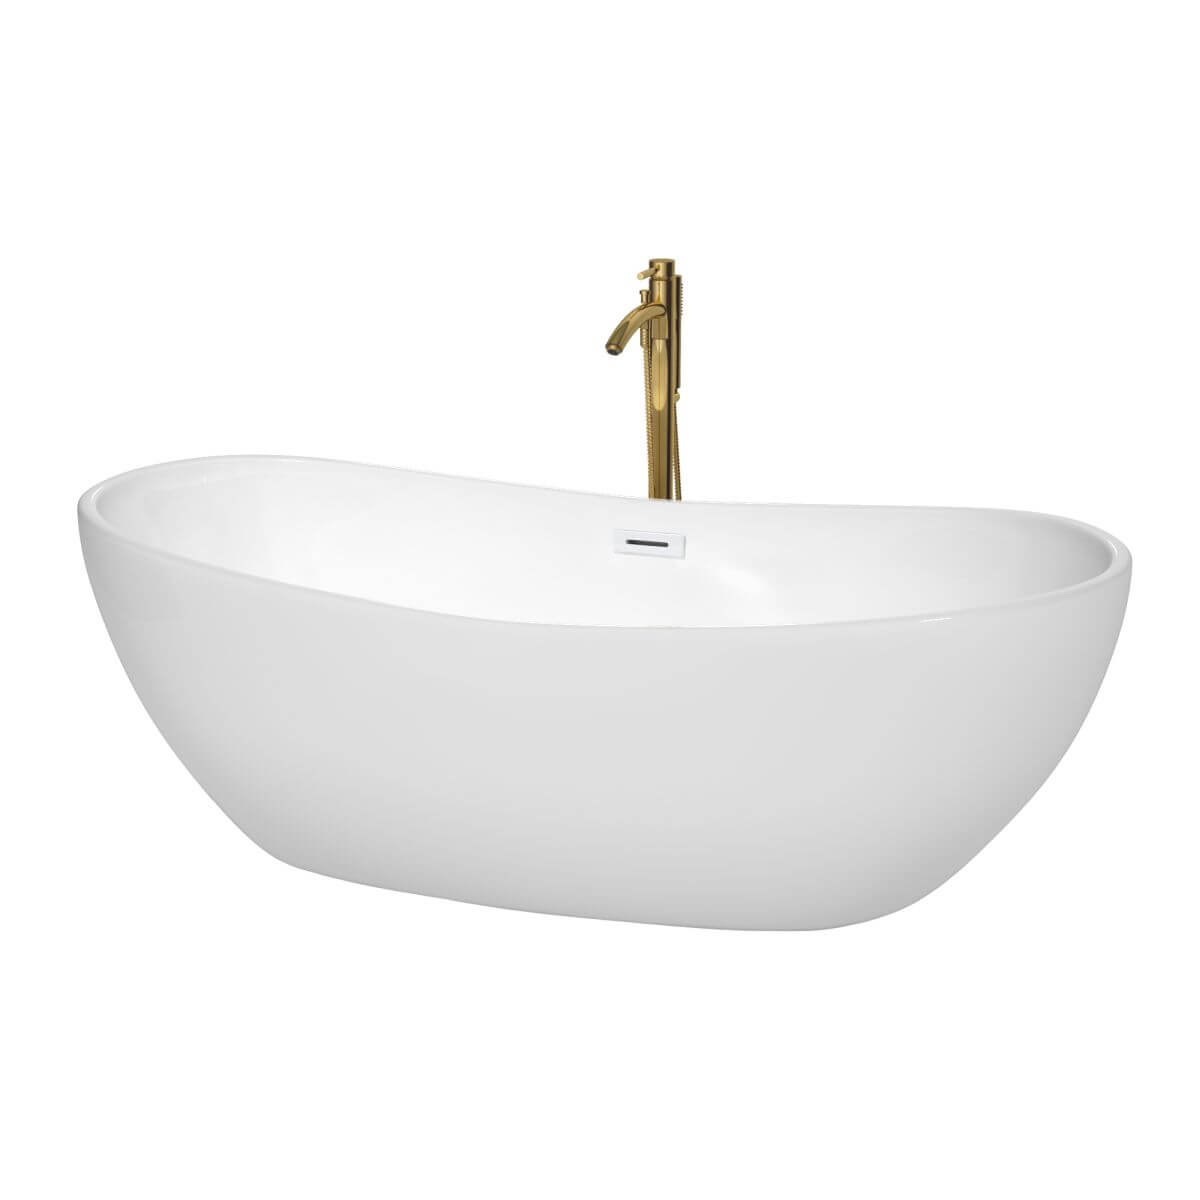 Wyndham Collection Rebecca 70 inch Freestanding Bathtub in White with Shiny White Trim and Floor Mounted Faucet in Brushed Gold - WCOBT101470SWATPGD